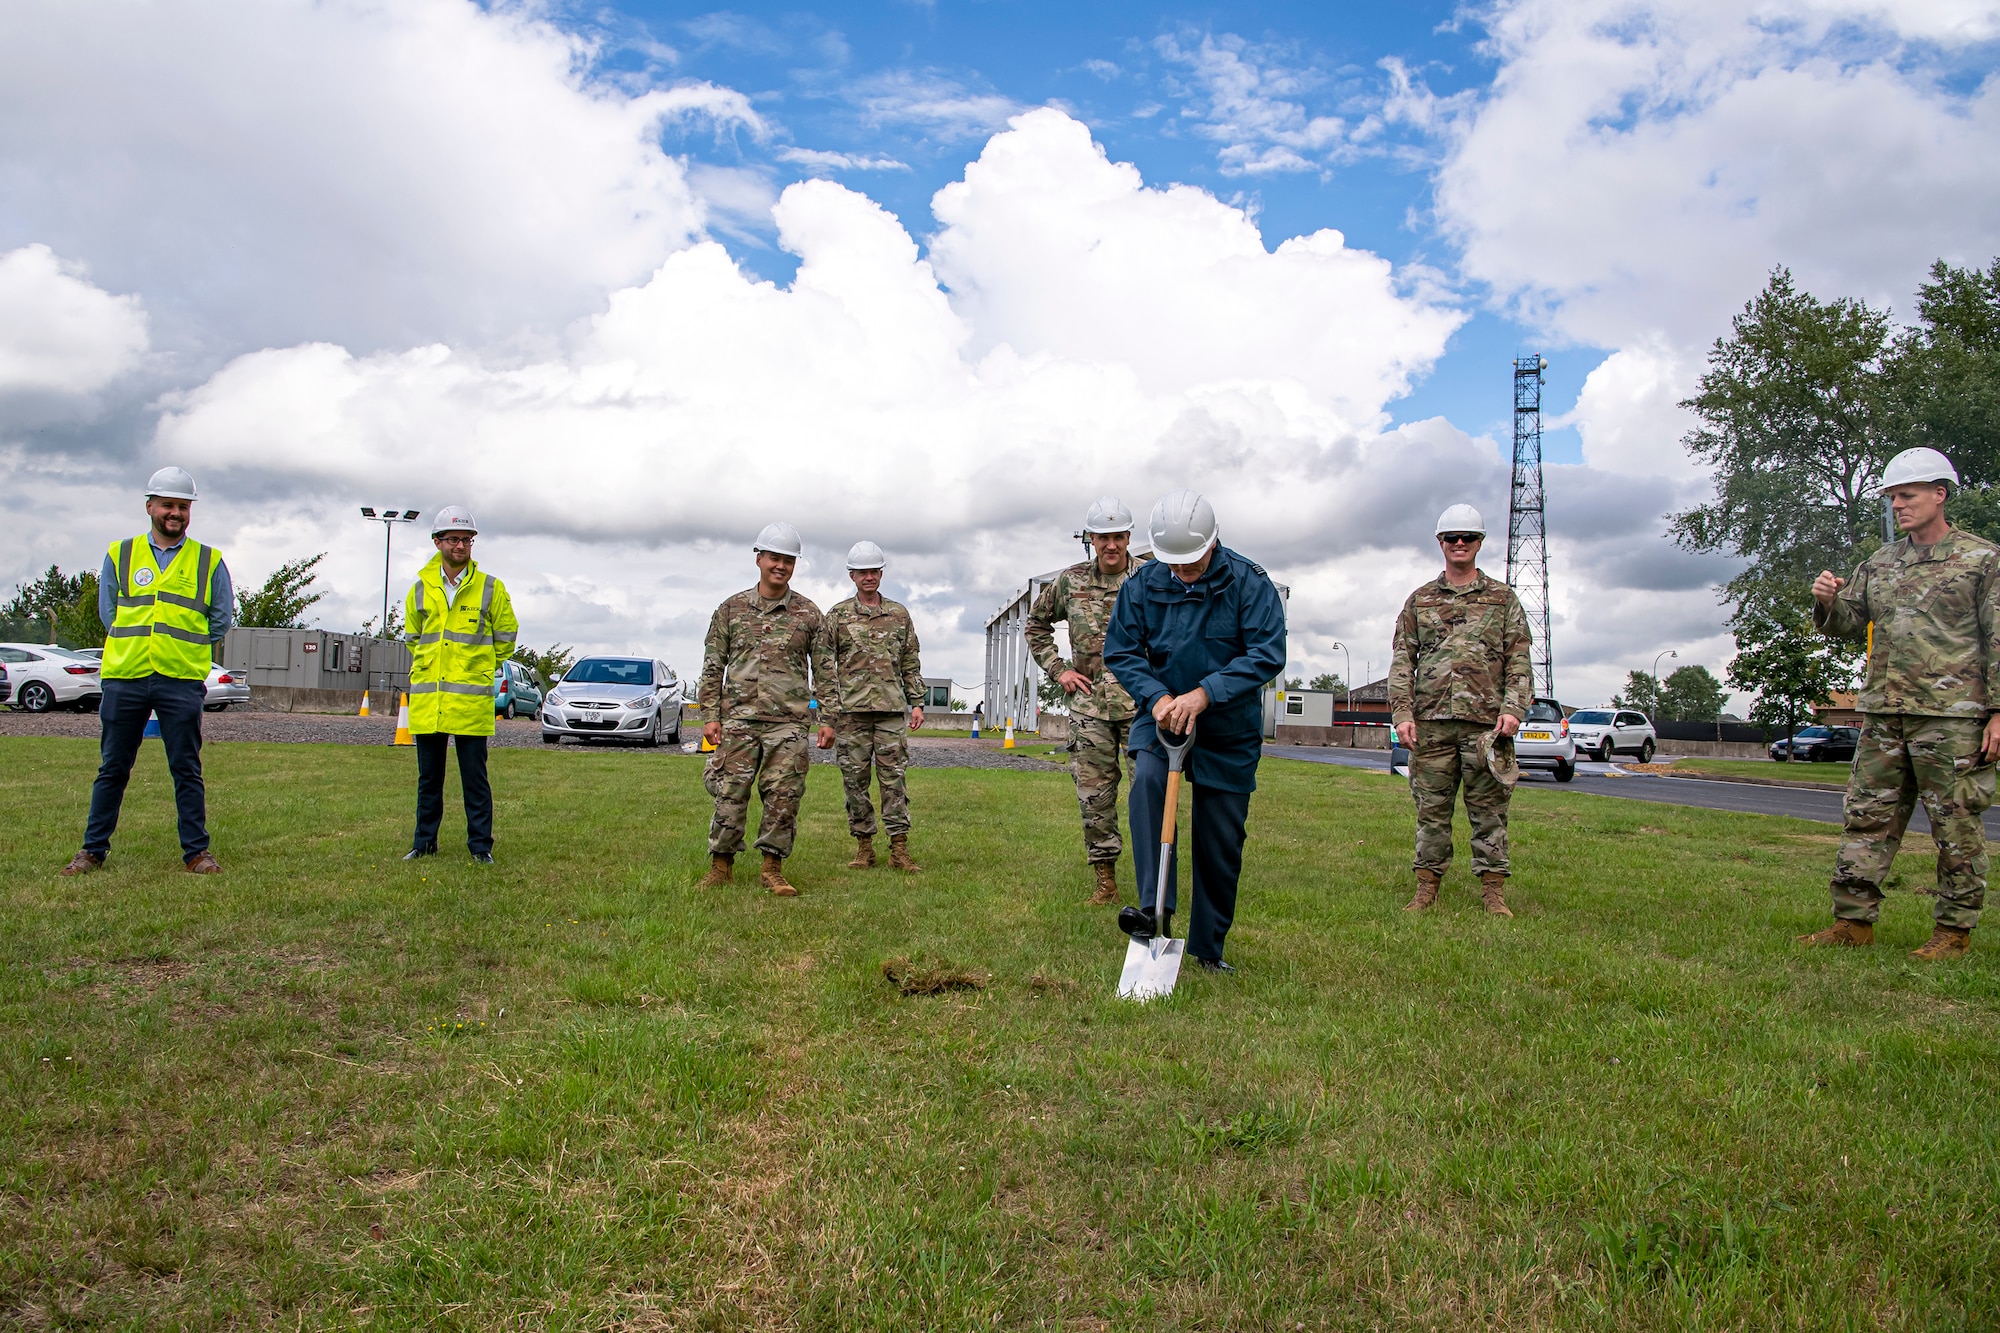 Royal Air Force (RAF) Squadron Leader Clive Wood (center), RAF Alconbury and RAF Molesworth commander, breaks ground on a construction project for the main gate at RAF Alconbury, England, July 2, 2020. Construction will commence on July 6, 2020 and effective from that date, installation entry and exit procedures will be modified to support the construction project. This project will provide a large vehicle inspection station, channelized traffic flow for better security and improved safety for personnel. (U.S. Air Force photo by Senior Airman Eugene Oliver)